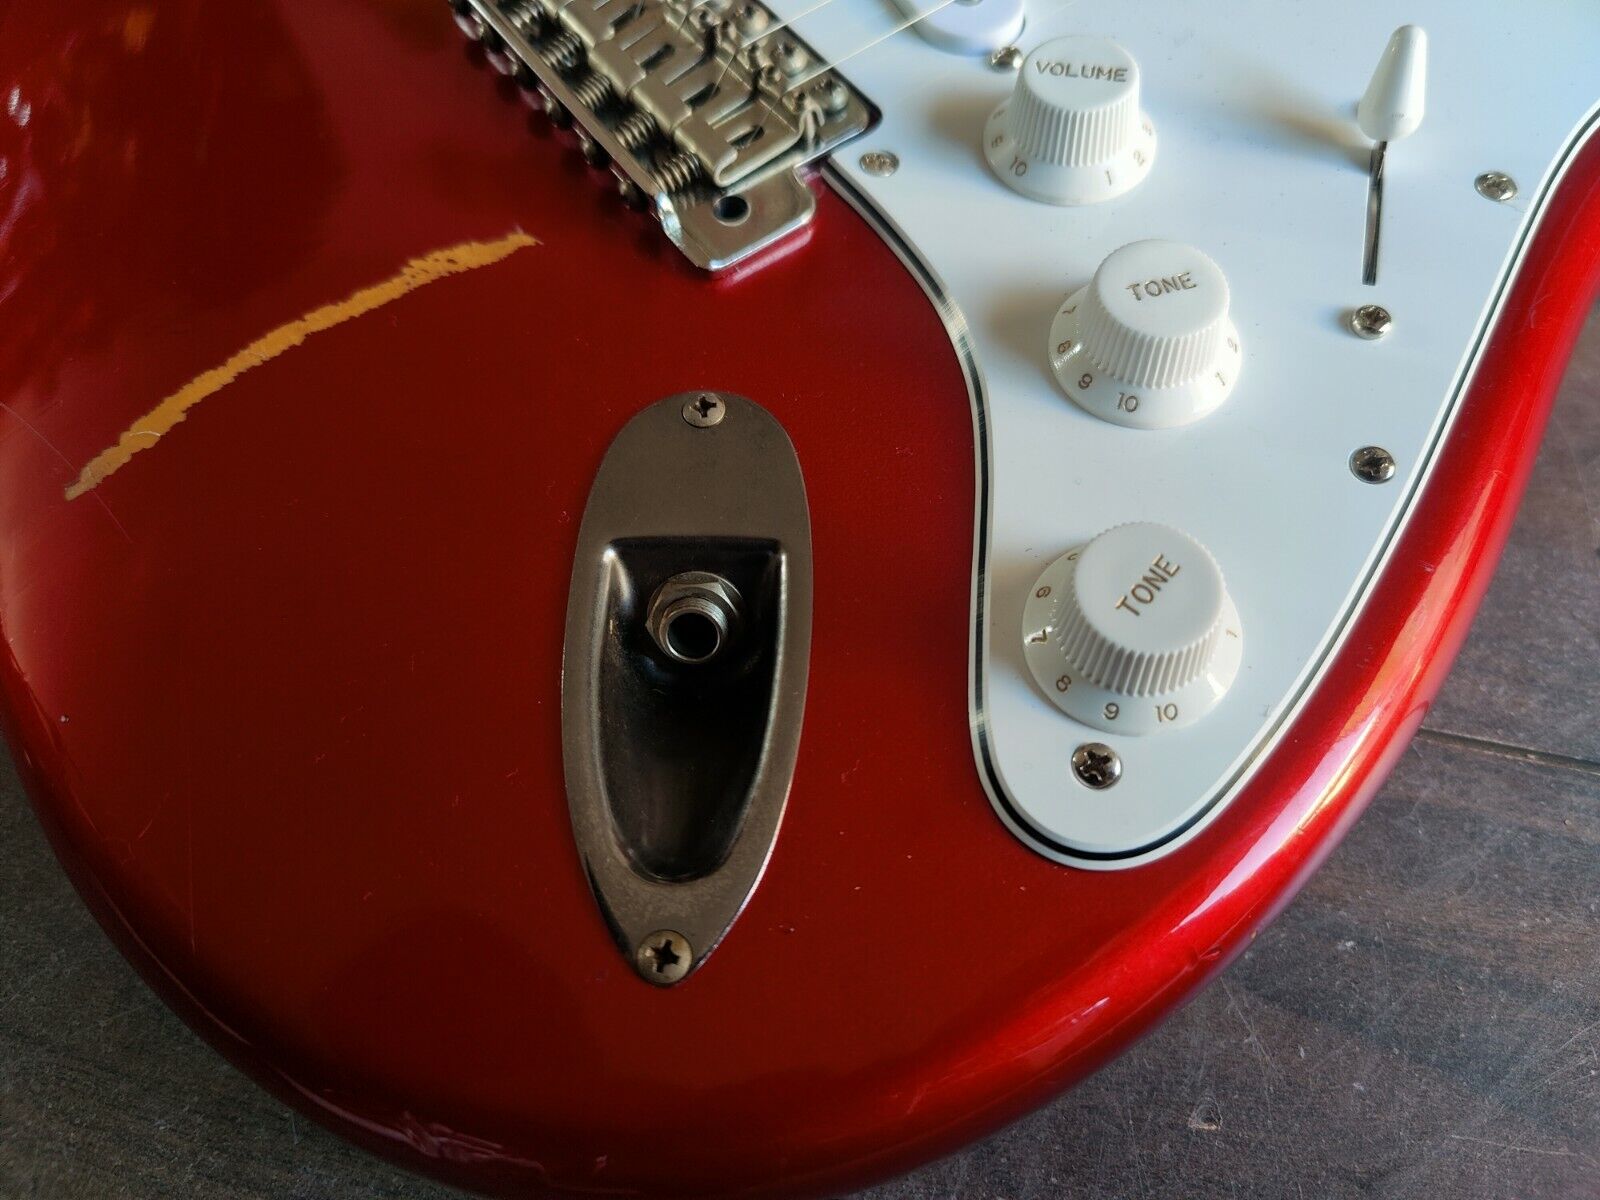 1980's Yamaha Japan ST400R Stratocaster (Candy Apple Red)